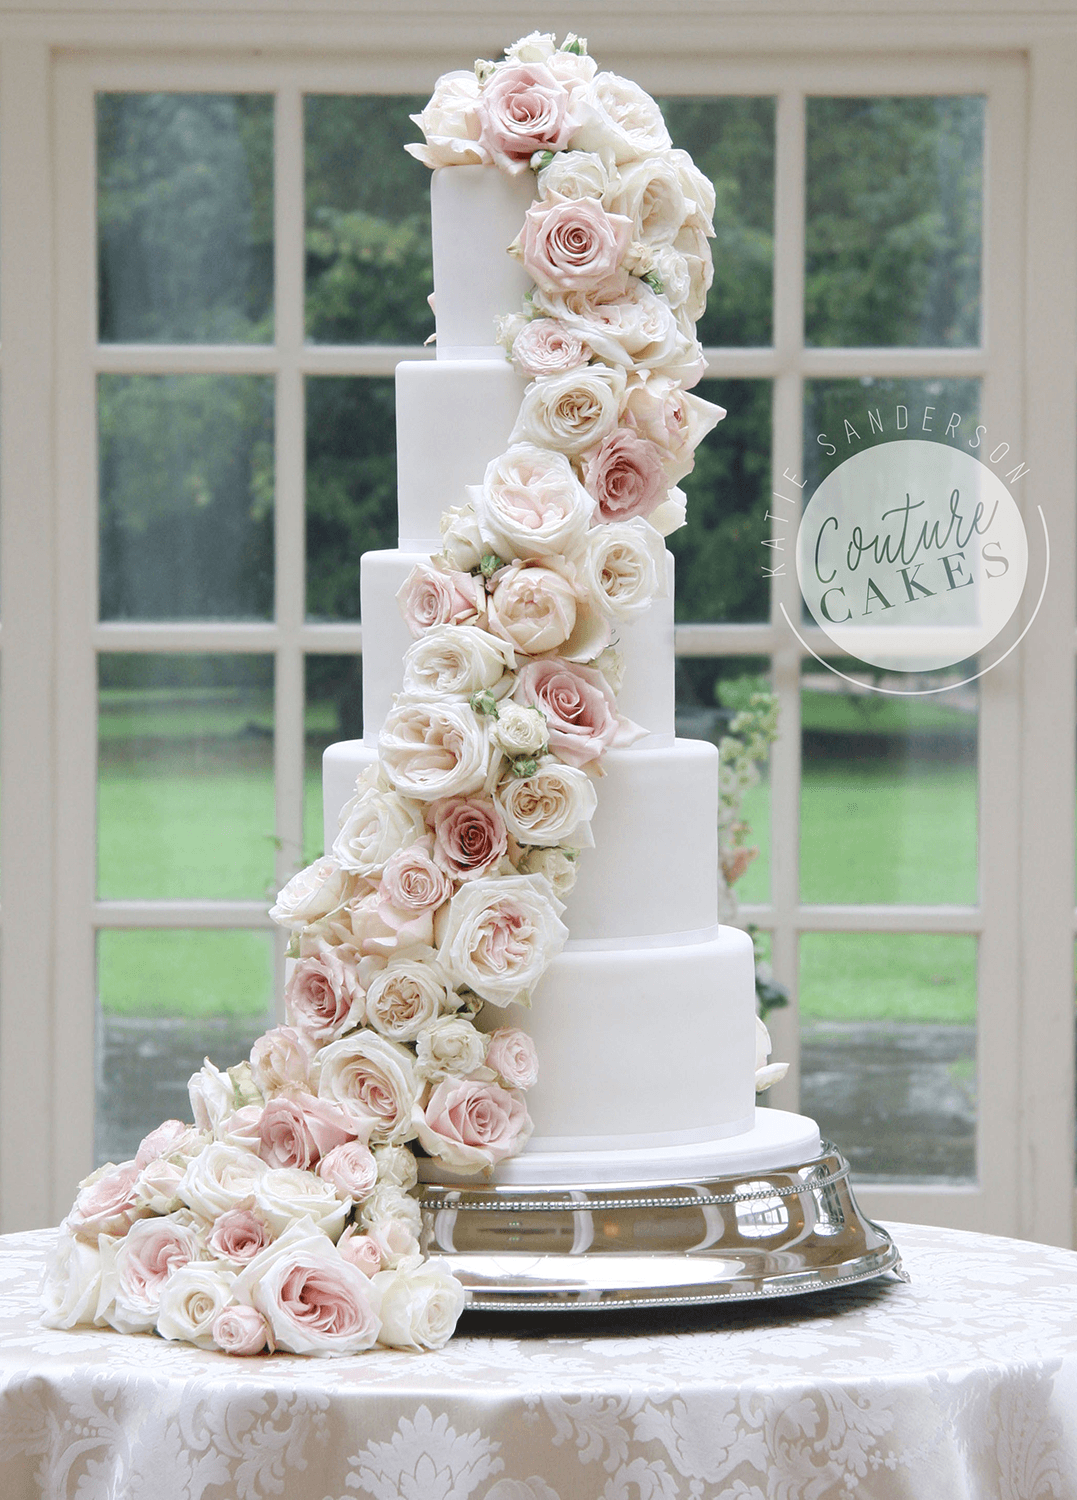 Cascading Roses Wedding Cake:  Serves 220 portions, Price category A £695 plus flowers £120-200